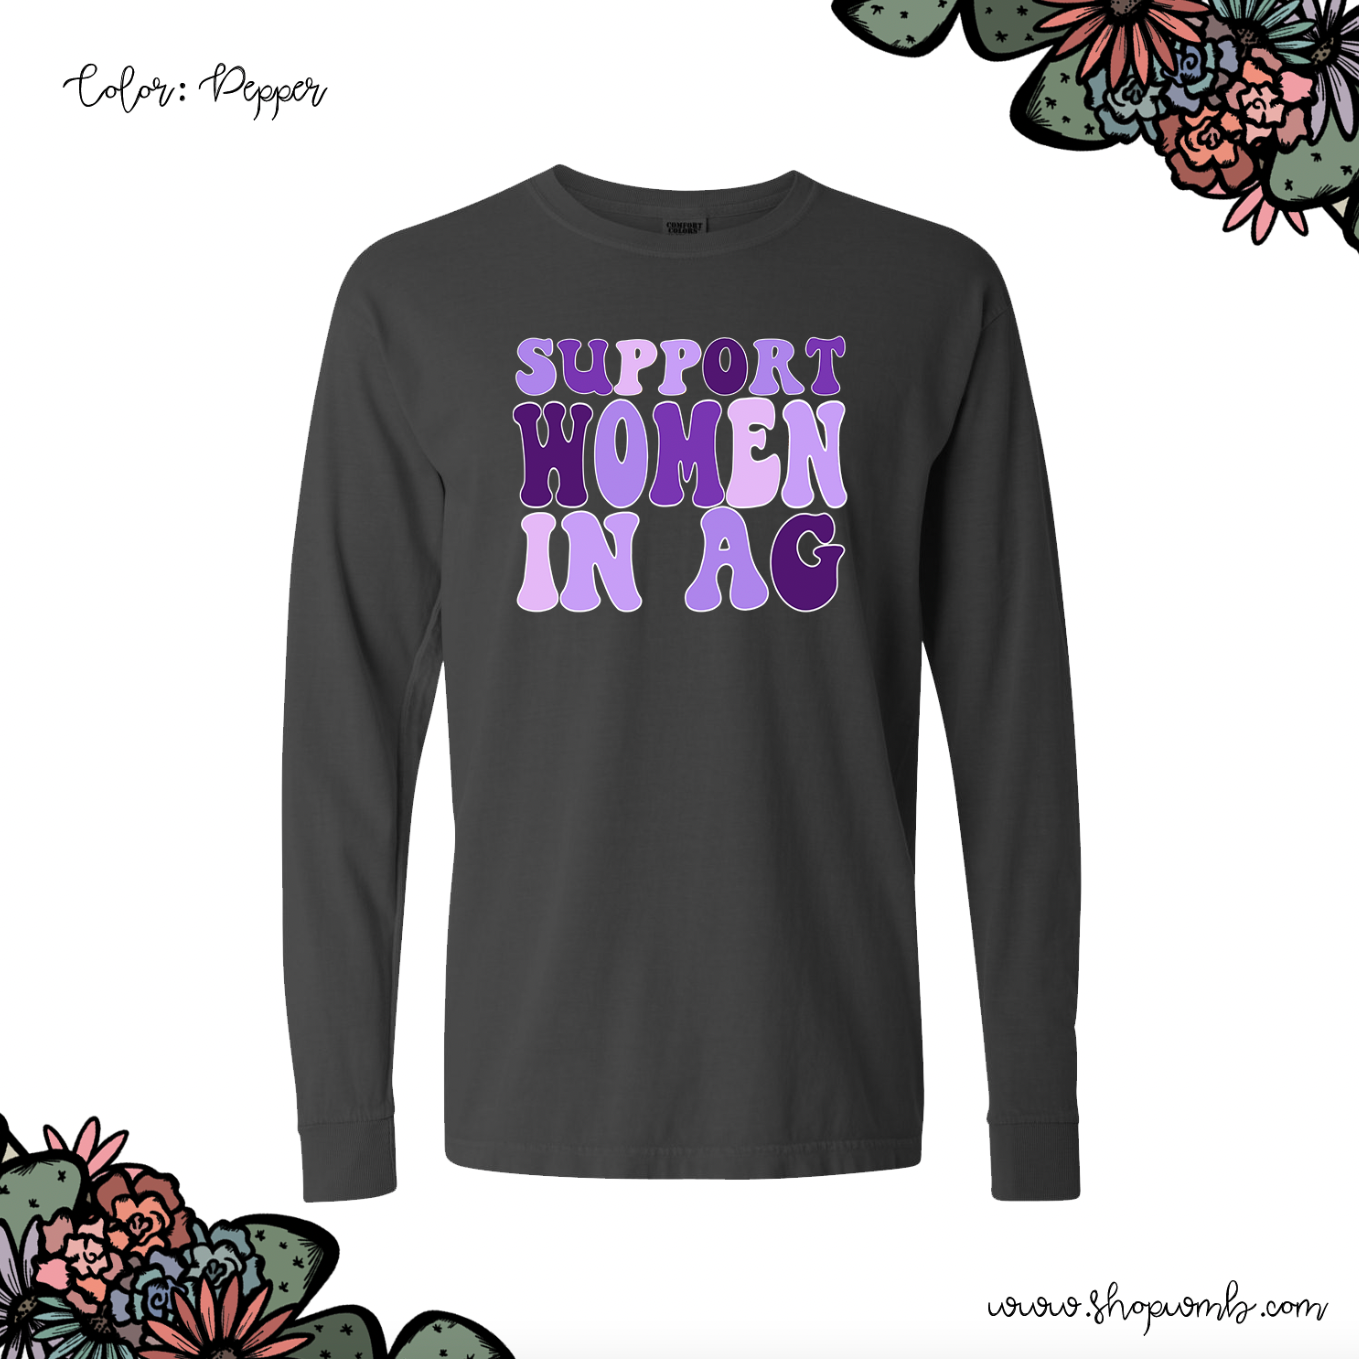 Purple Support Women In AG LONG SLEEVE T-Shirt (S-3XL) - Multiple Colors!